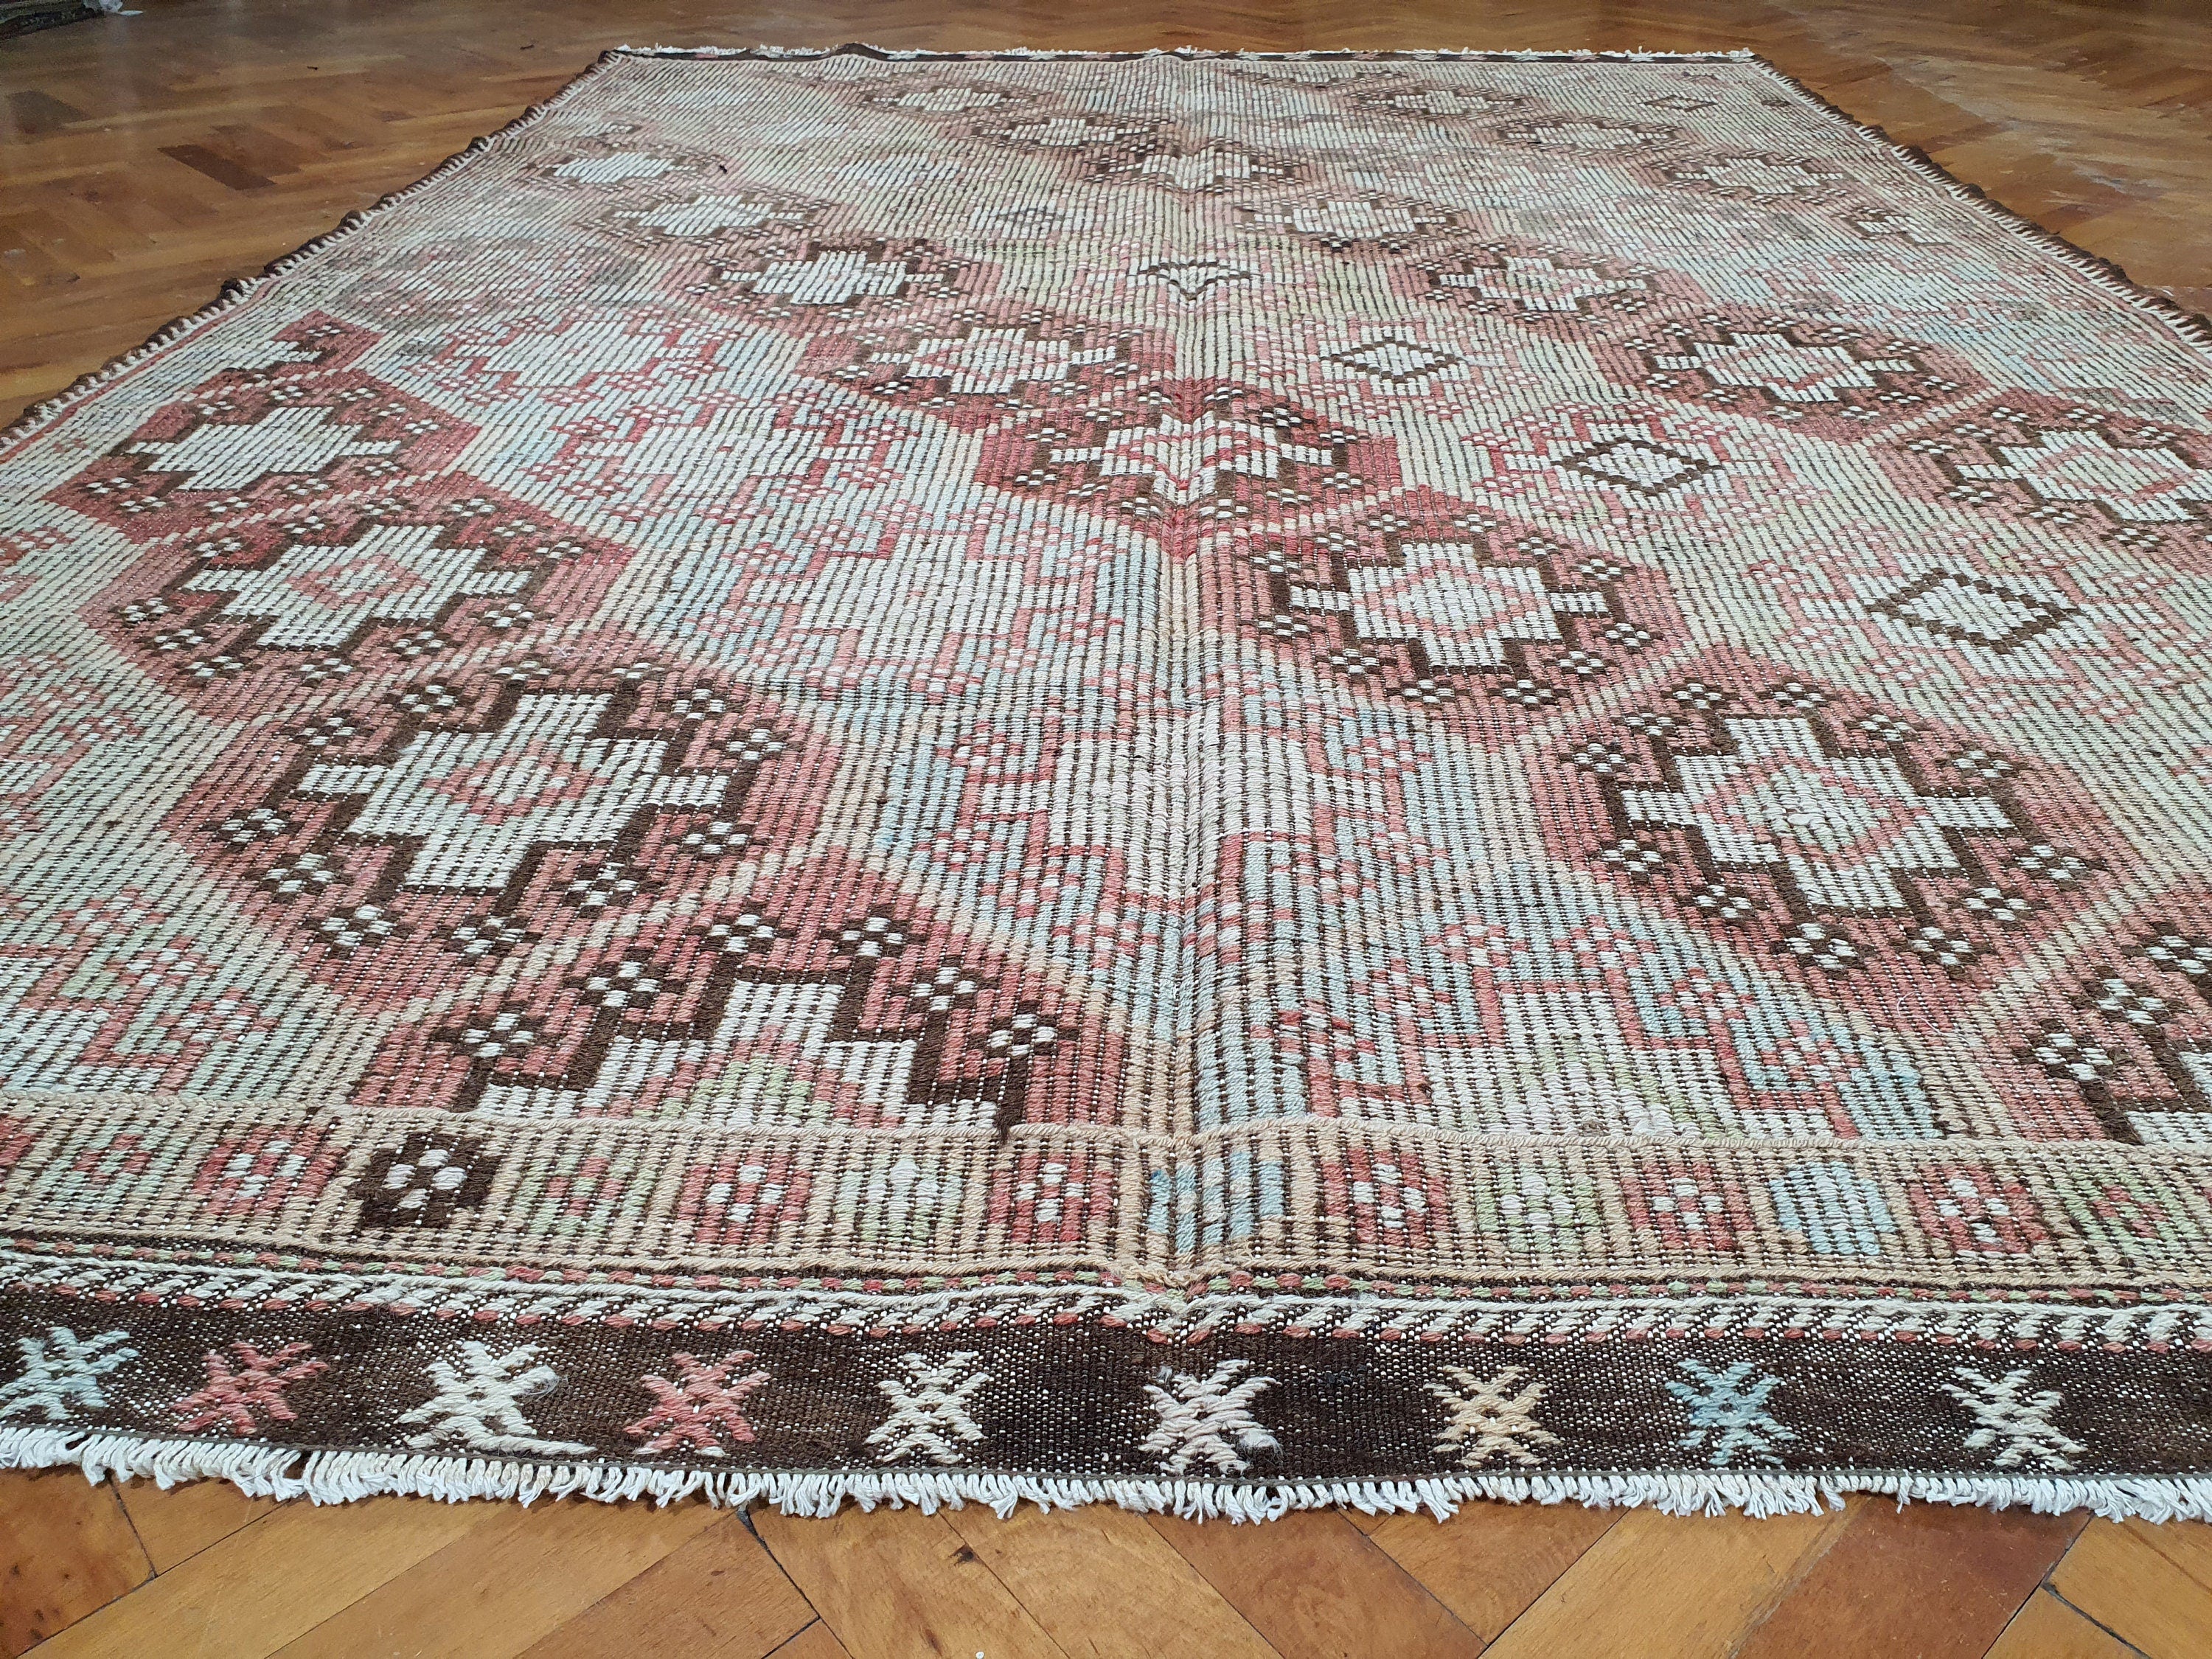 Turkish Kilim Rug 8 x 6 ft Brown Green and White Natural Wool Embroidered Vintage Cicim Floor Rug for Bohemian or Retro Home Decor